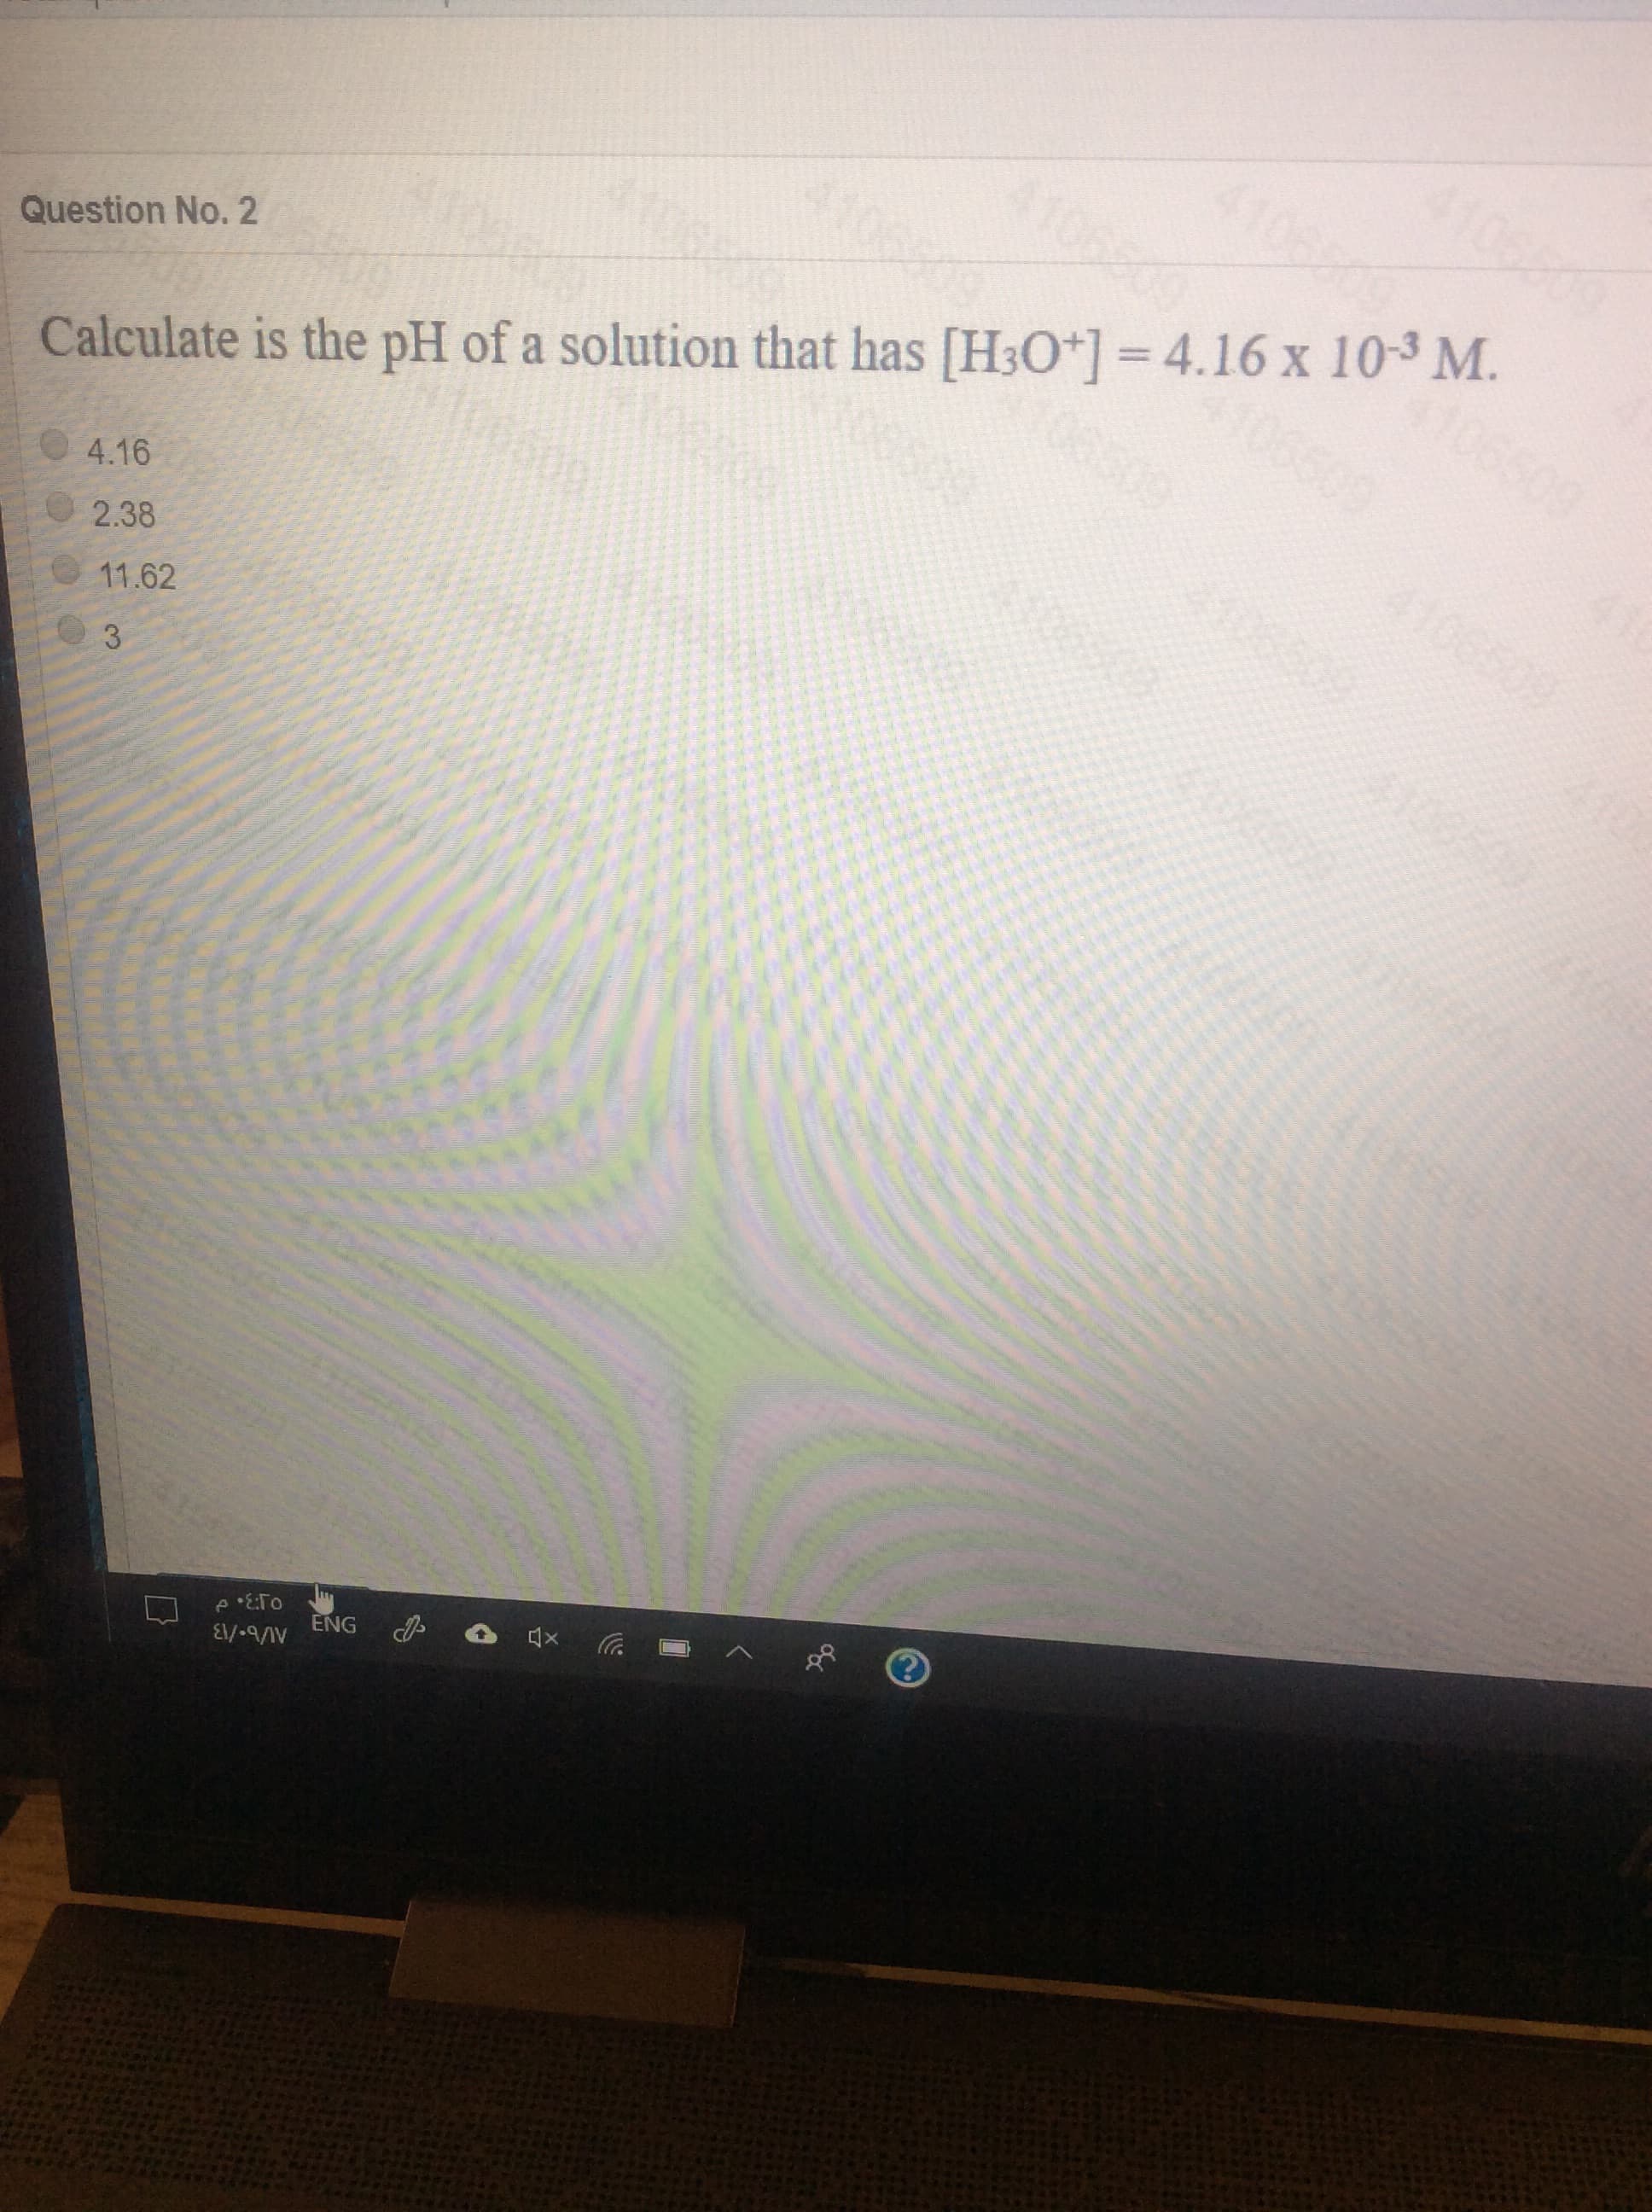 06509
culate is the pH of a solution that has [H3O*] =4.16 x 10-3 M.
16
38
1.62
